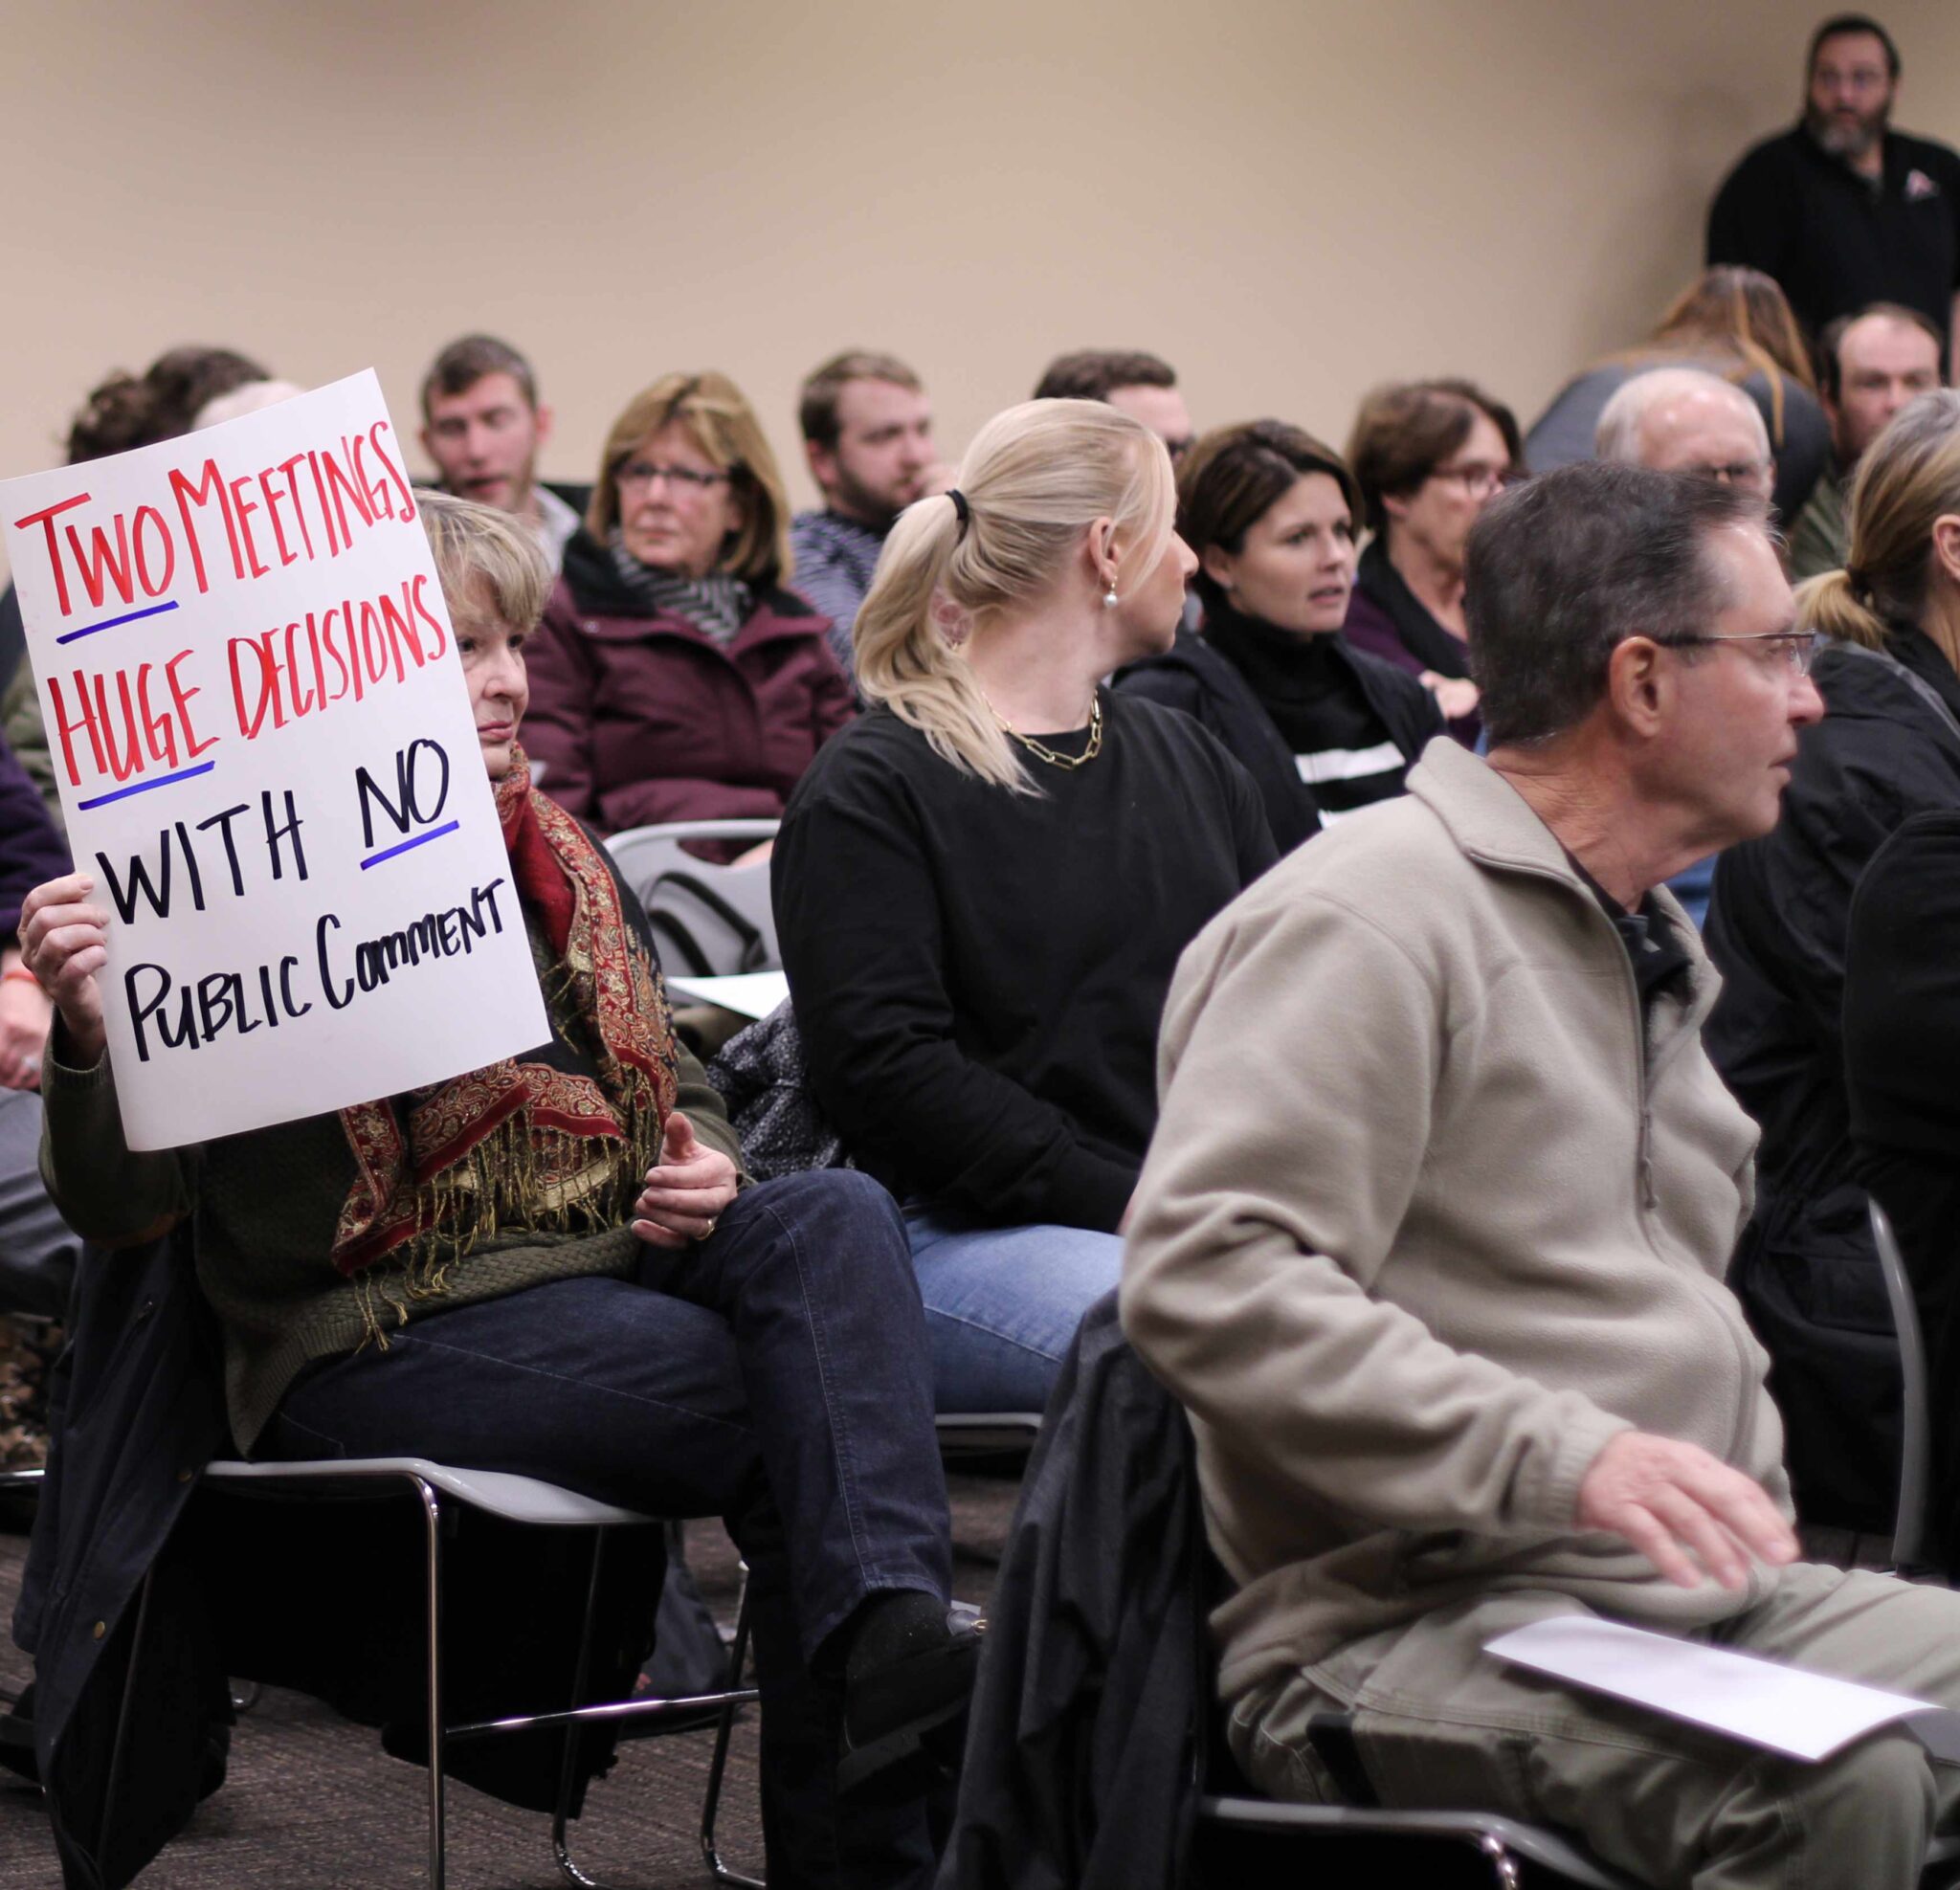 Woman holds up sign "two meetings, Huge decisions, with no public comment